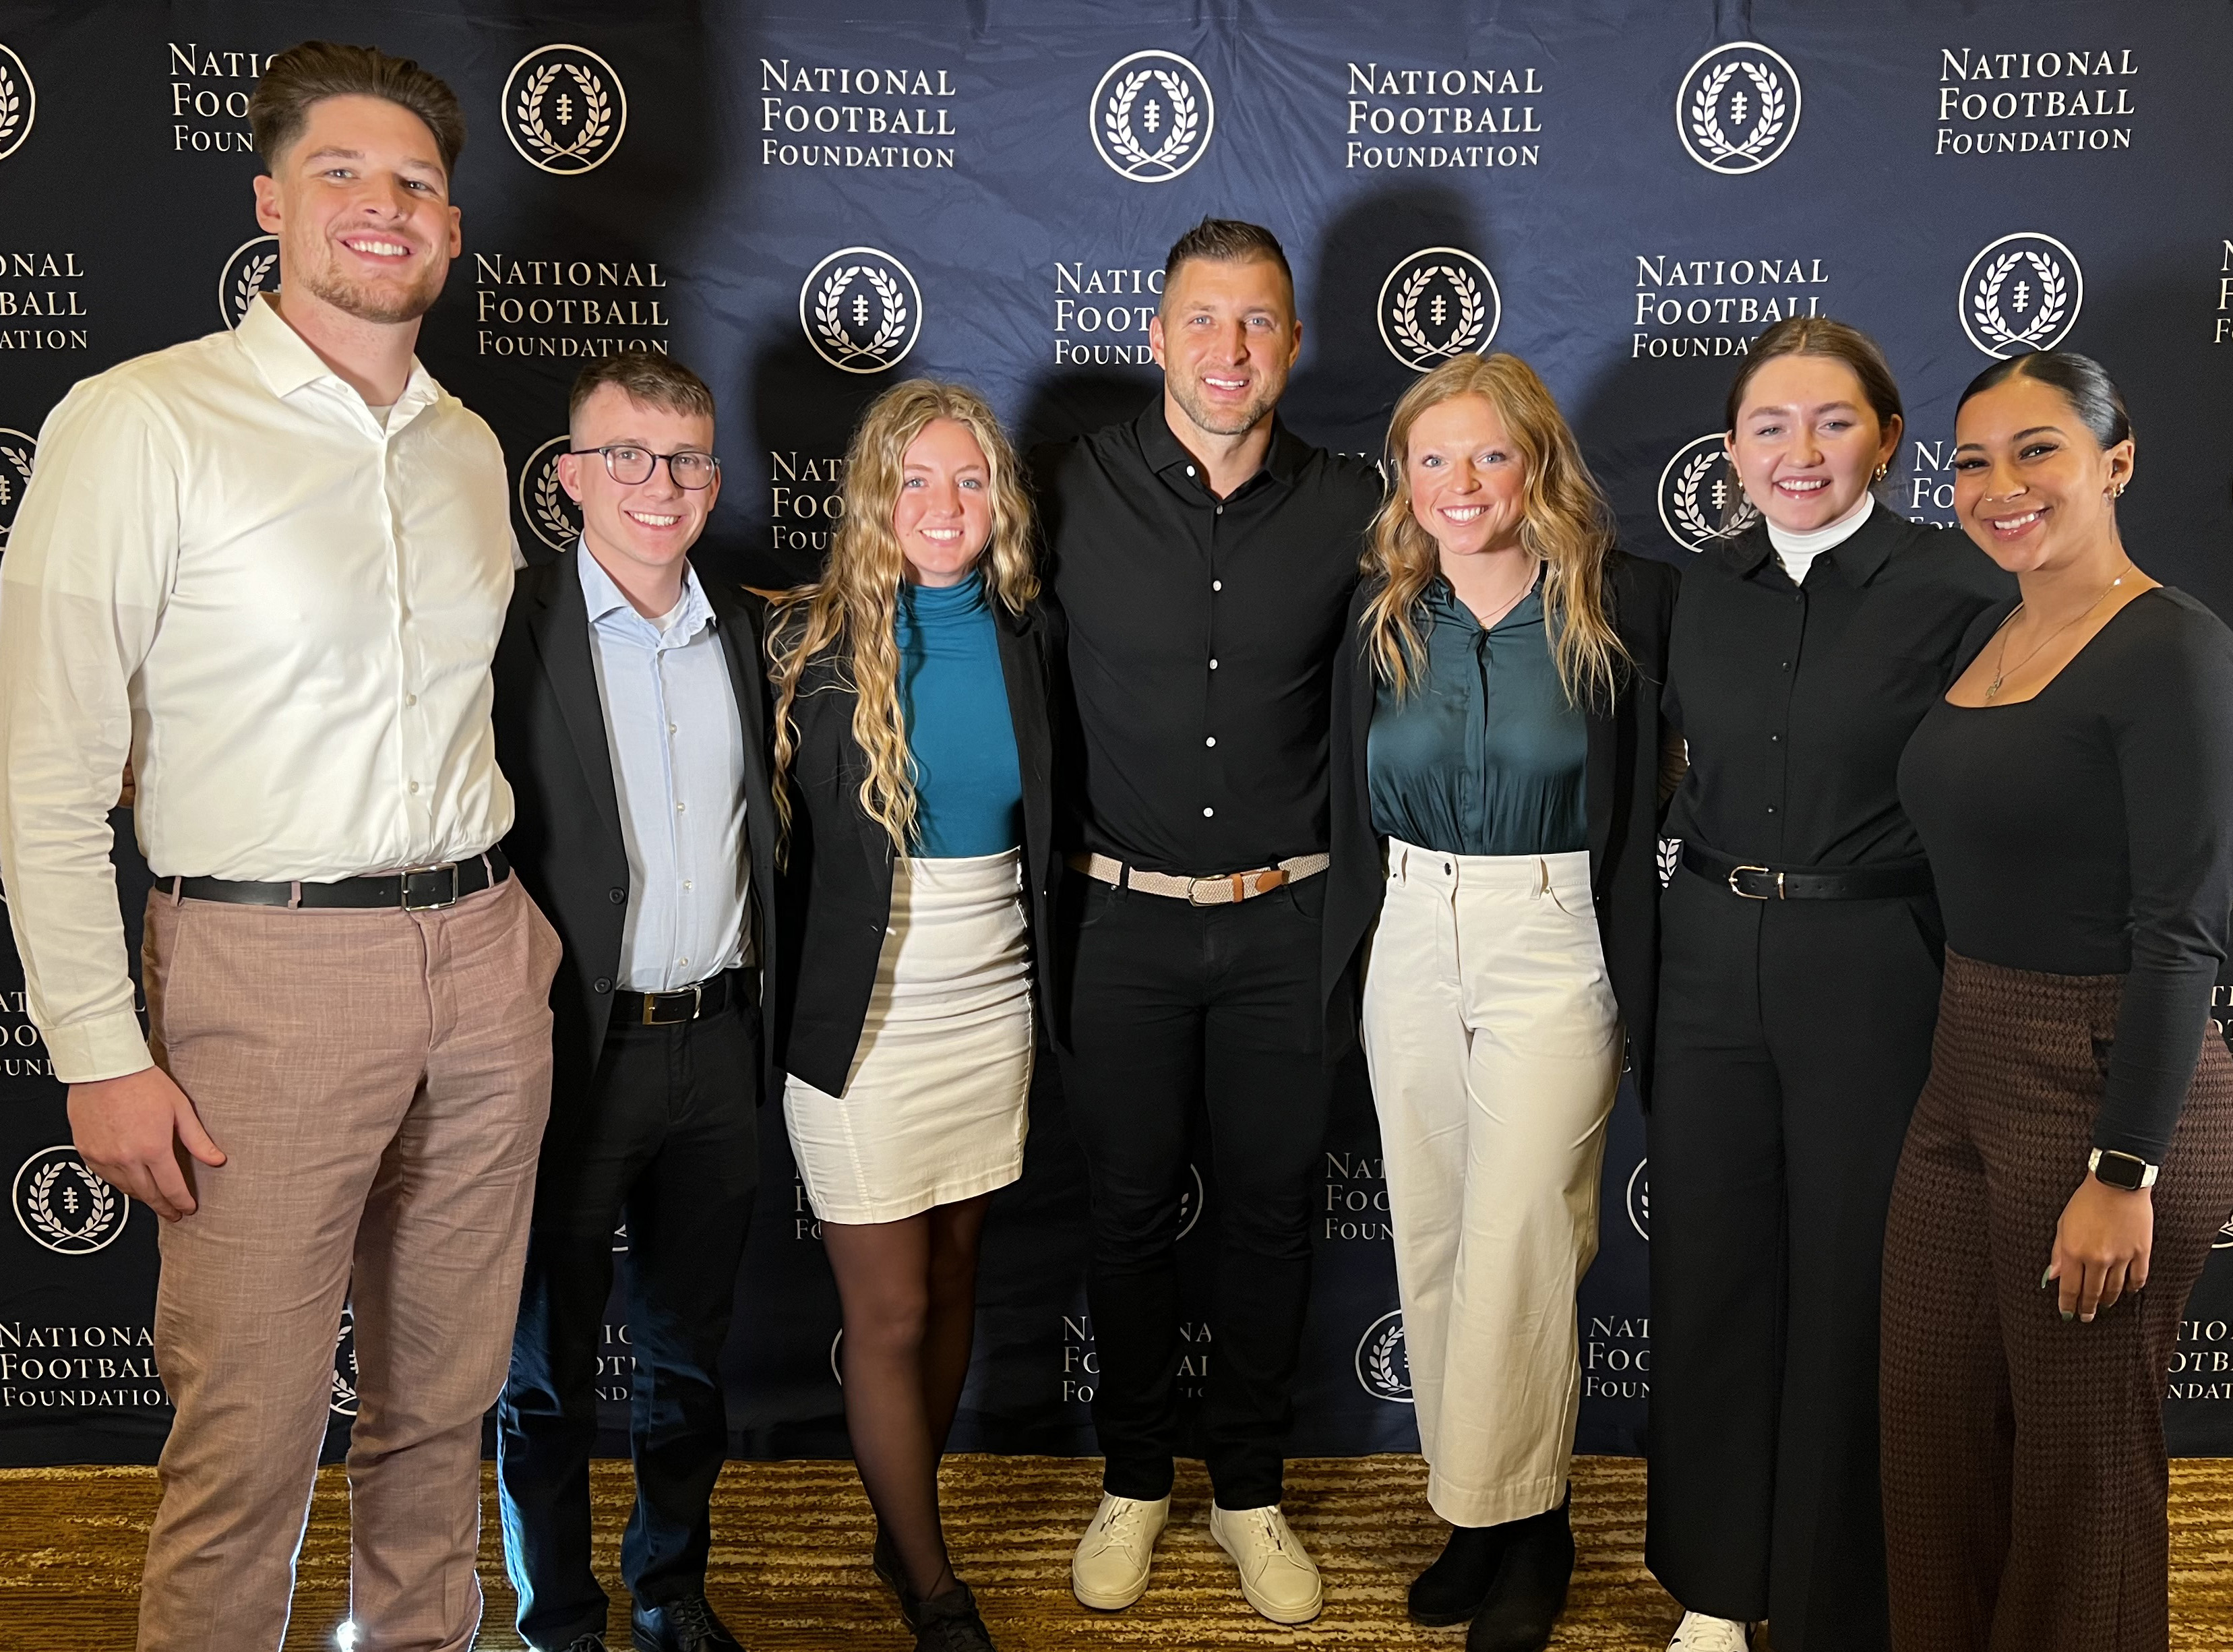 ISU Students with football legend, Tim Tebow, at the National Football Foundation College Football Award Ceremony